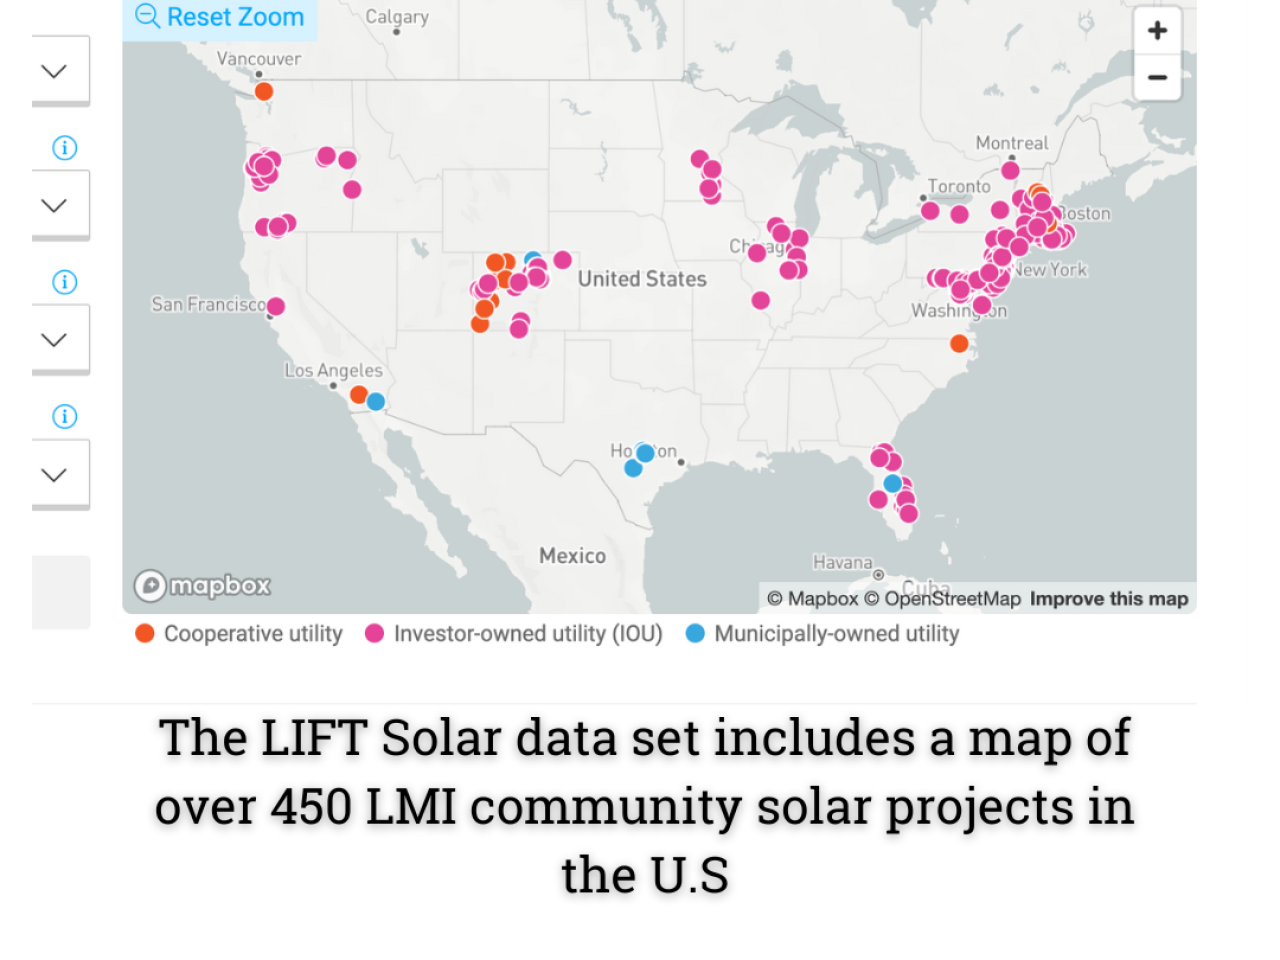 The LIFT Solar data set includes a map of over 450 LMI community solar projects in the U.S